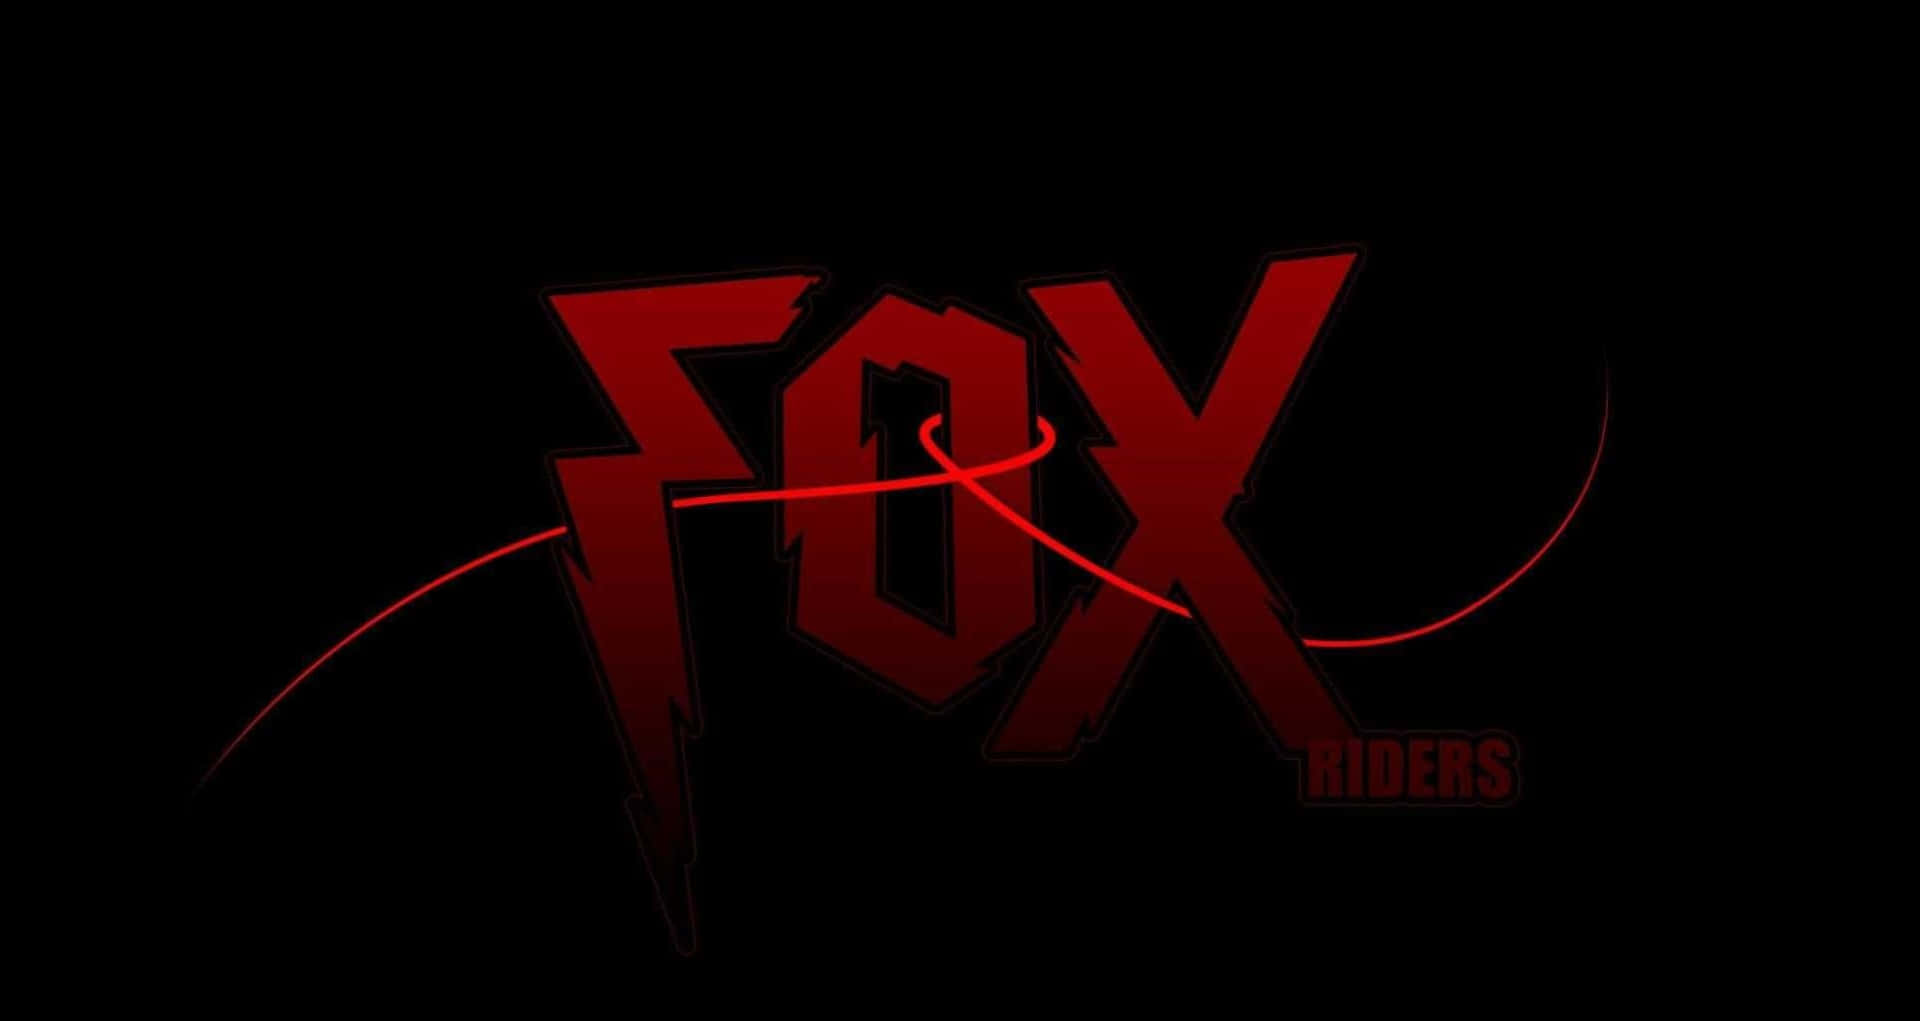 Fox Racing for the Thrill of Adrenaline Wallpaper